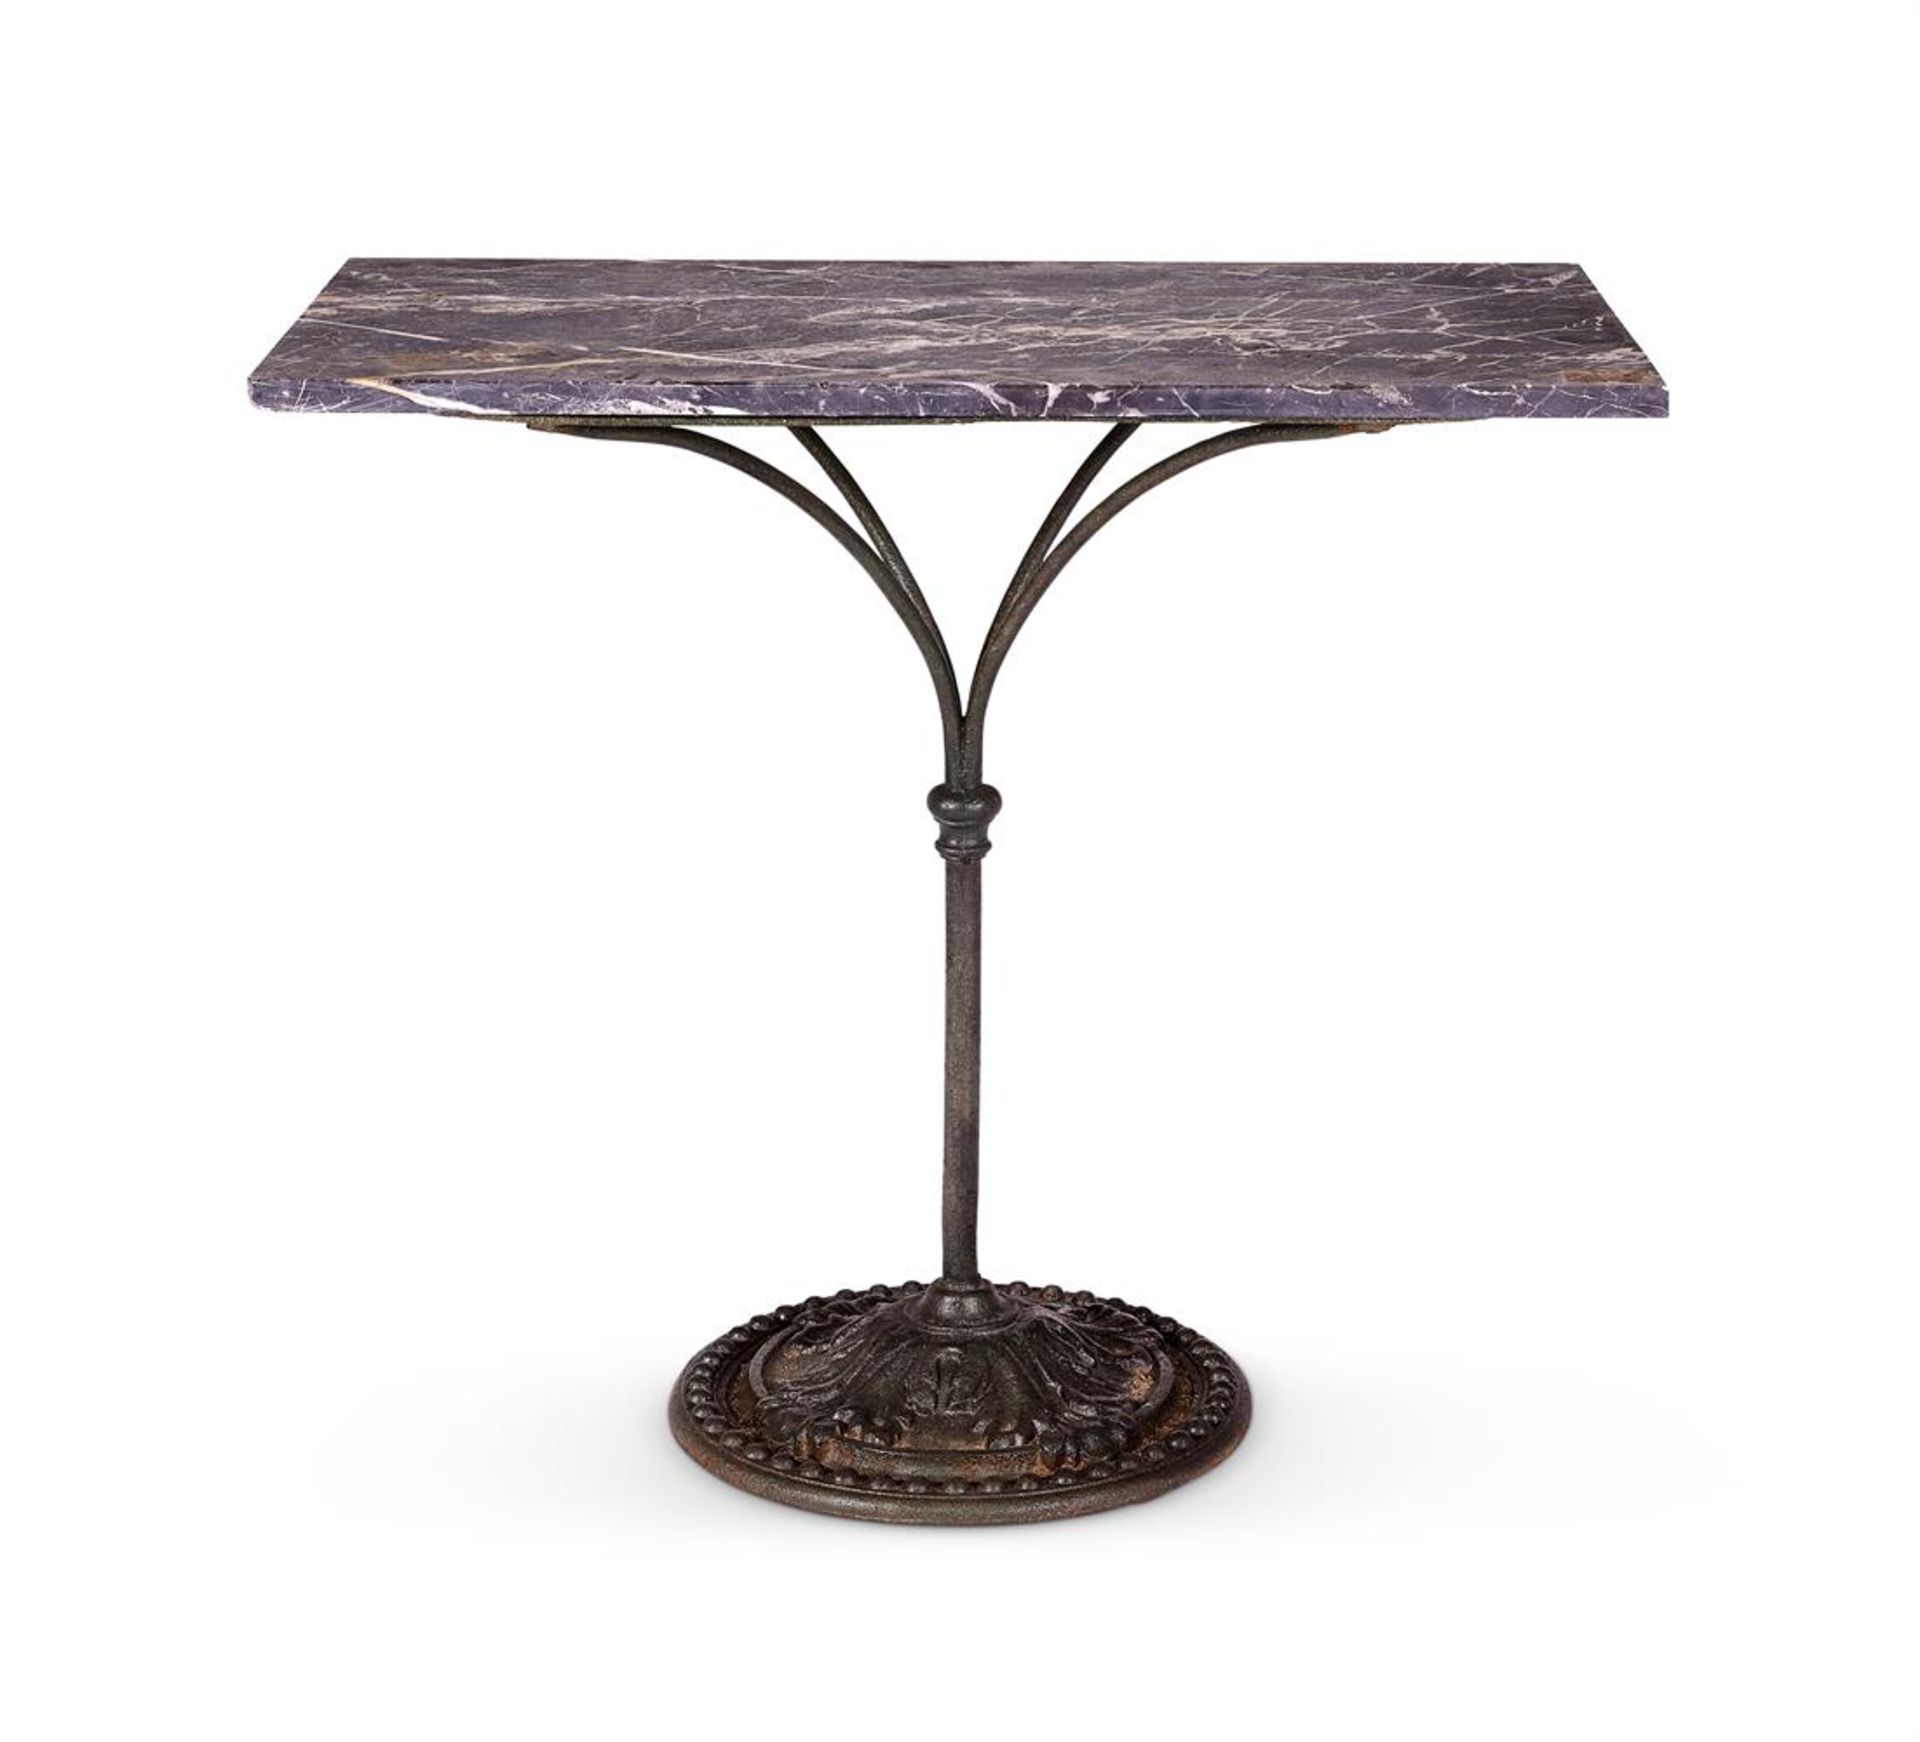 A VICTORIAN CAST IRON SIDE OR GARDEN TABLE, LATE 19TH CENTURY